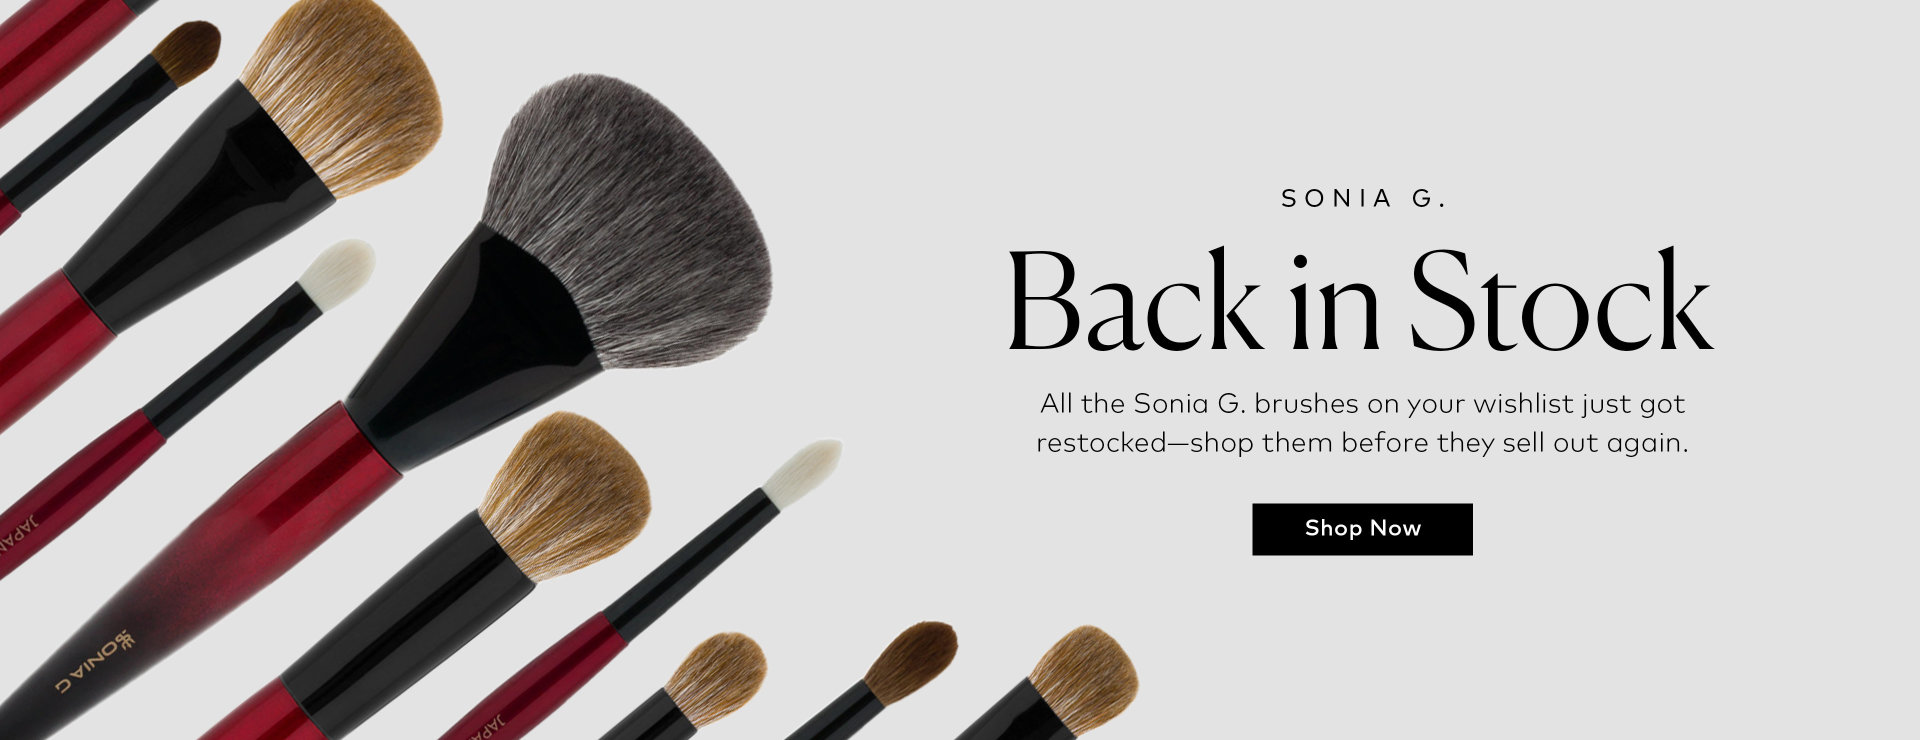 Shop your favorite Sonia G. brushes before they sell out again on Beautylish.com